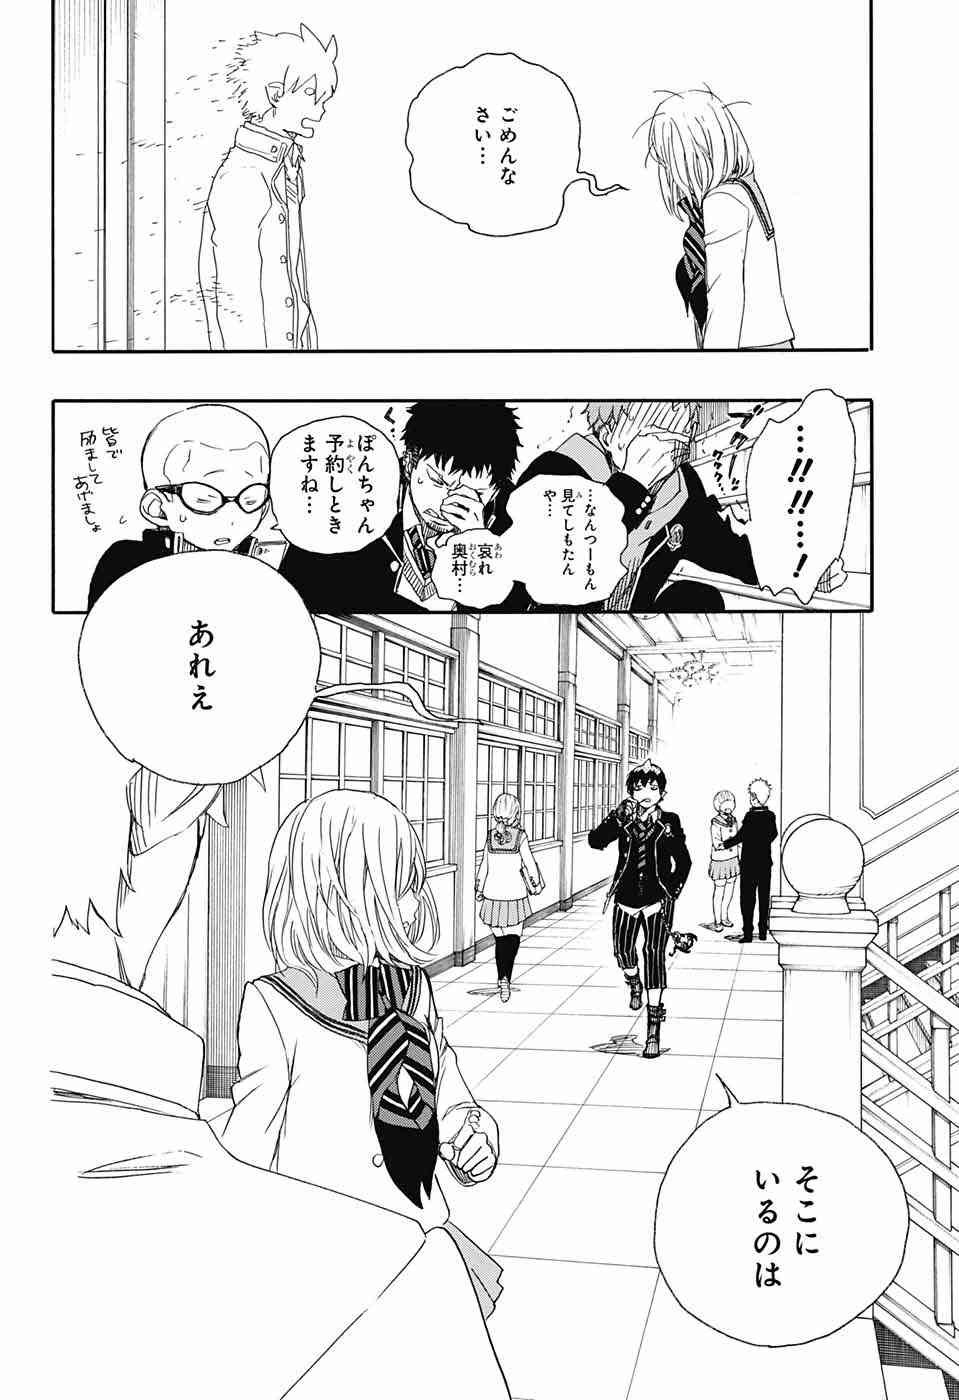 Ao no Exorcist - Chapter 82 - Page 34